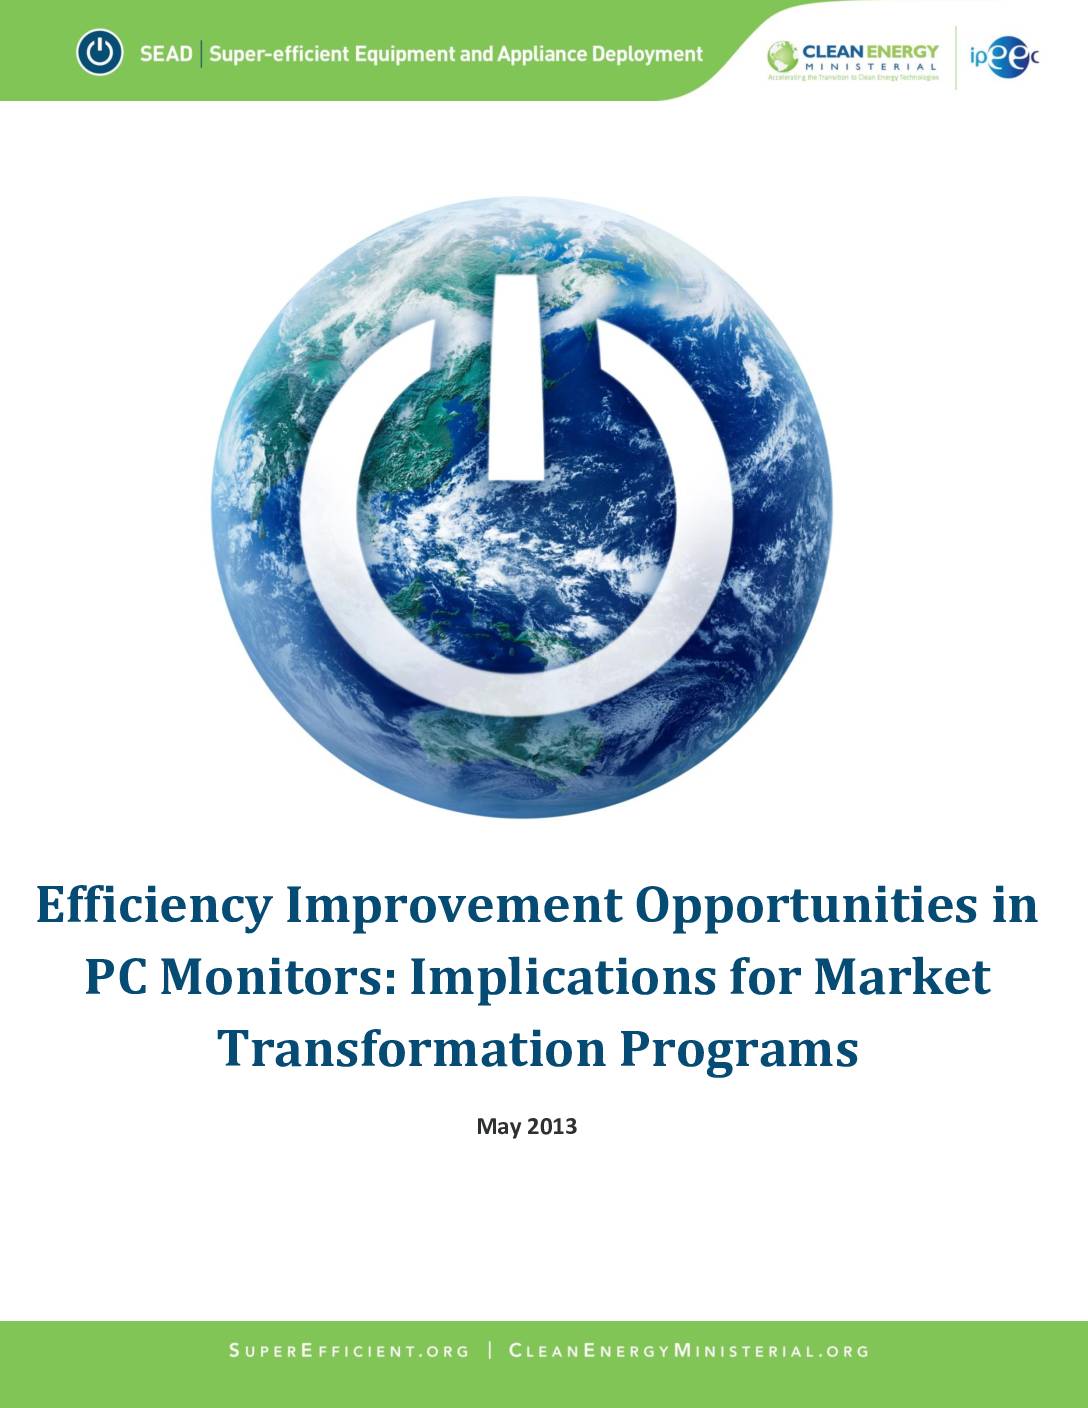 Efficiency Improvement Opportunities in PC Monitors: Implications for Market Transformation Programs